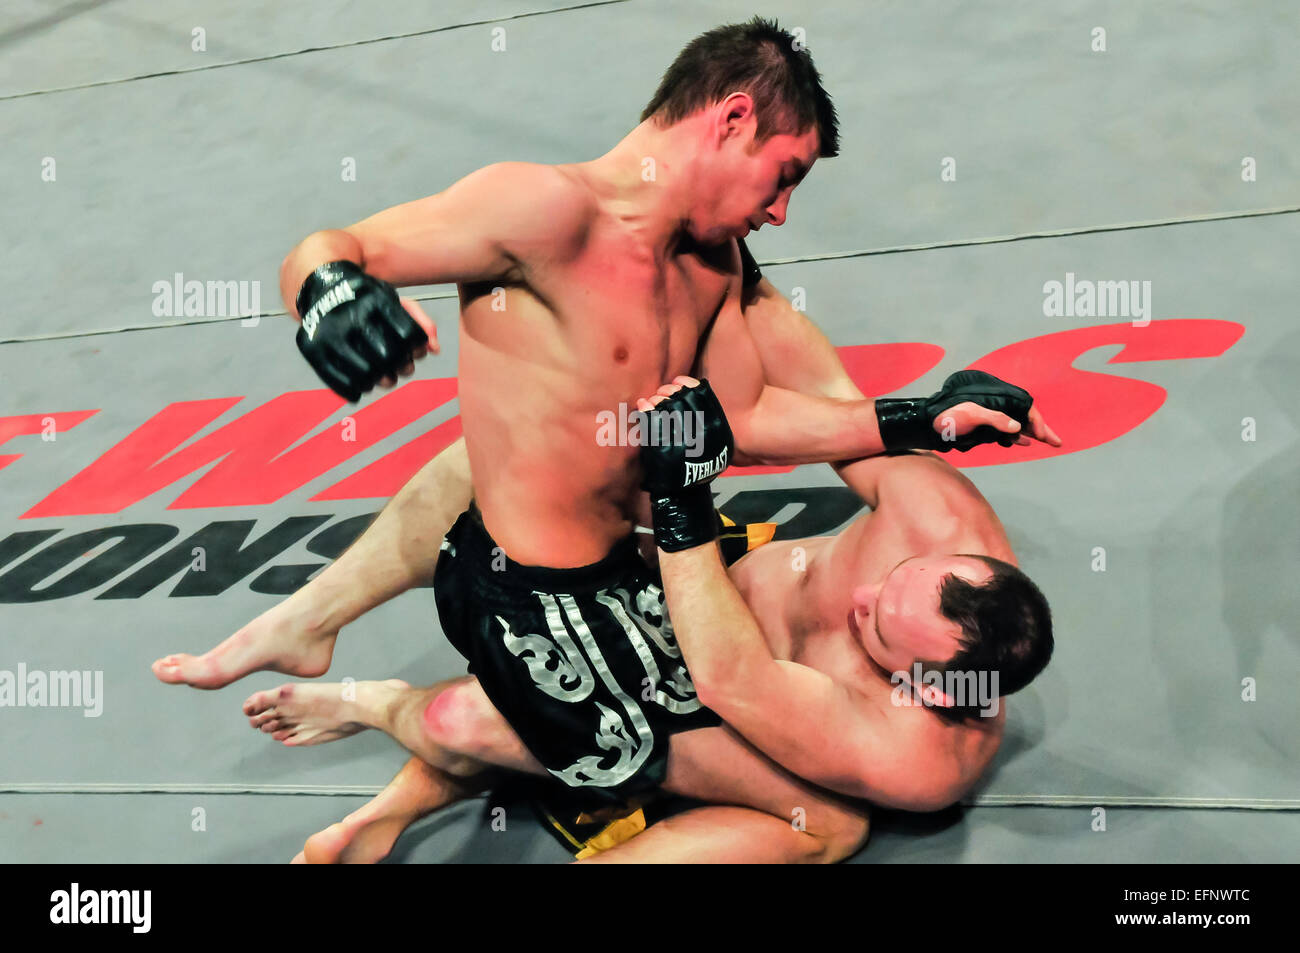 MMA fighter pins his opponent on the canvas and starts landing punches to his head. Stock Photo